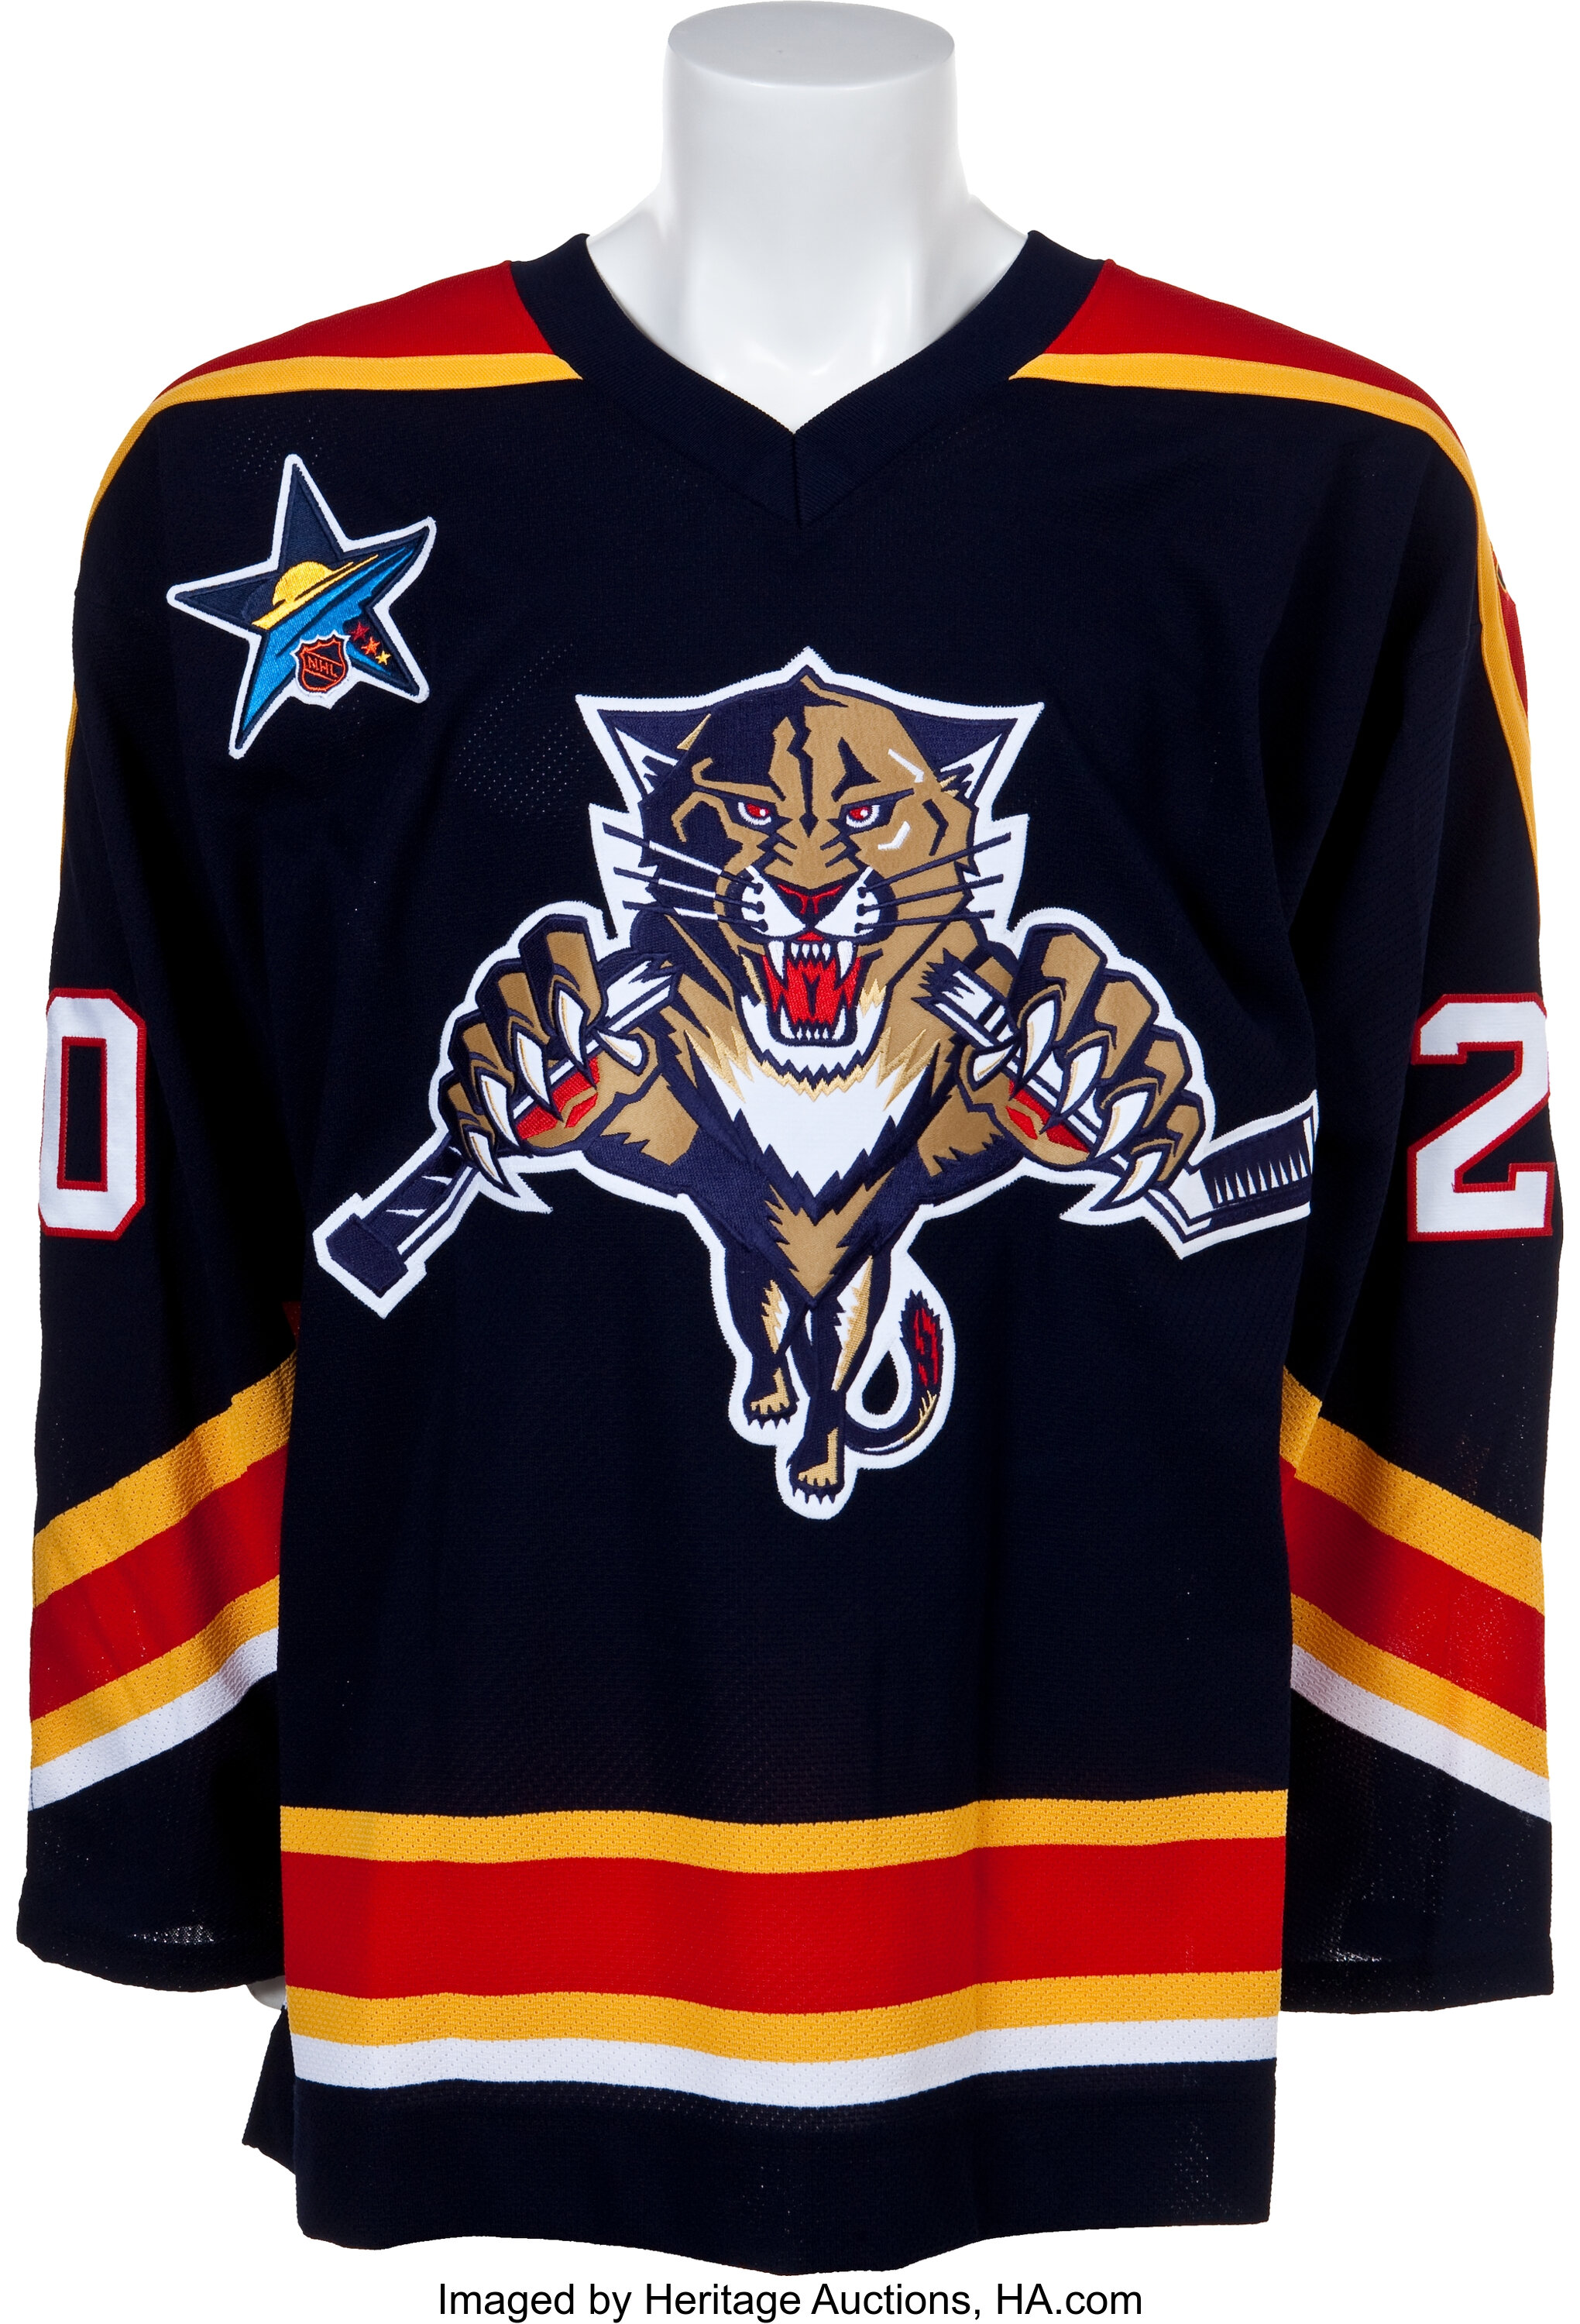 Flordia Panthers Pavel Bure Starter Authentic Jersey Size 48 GUC